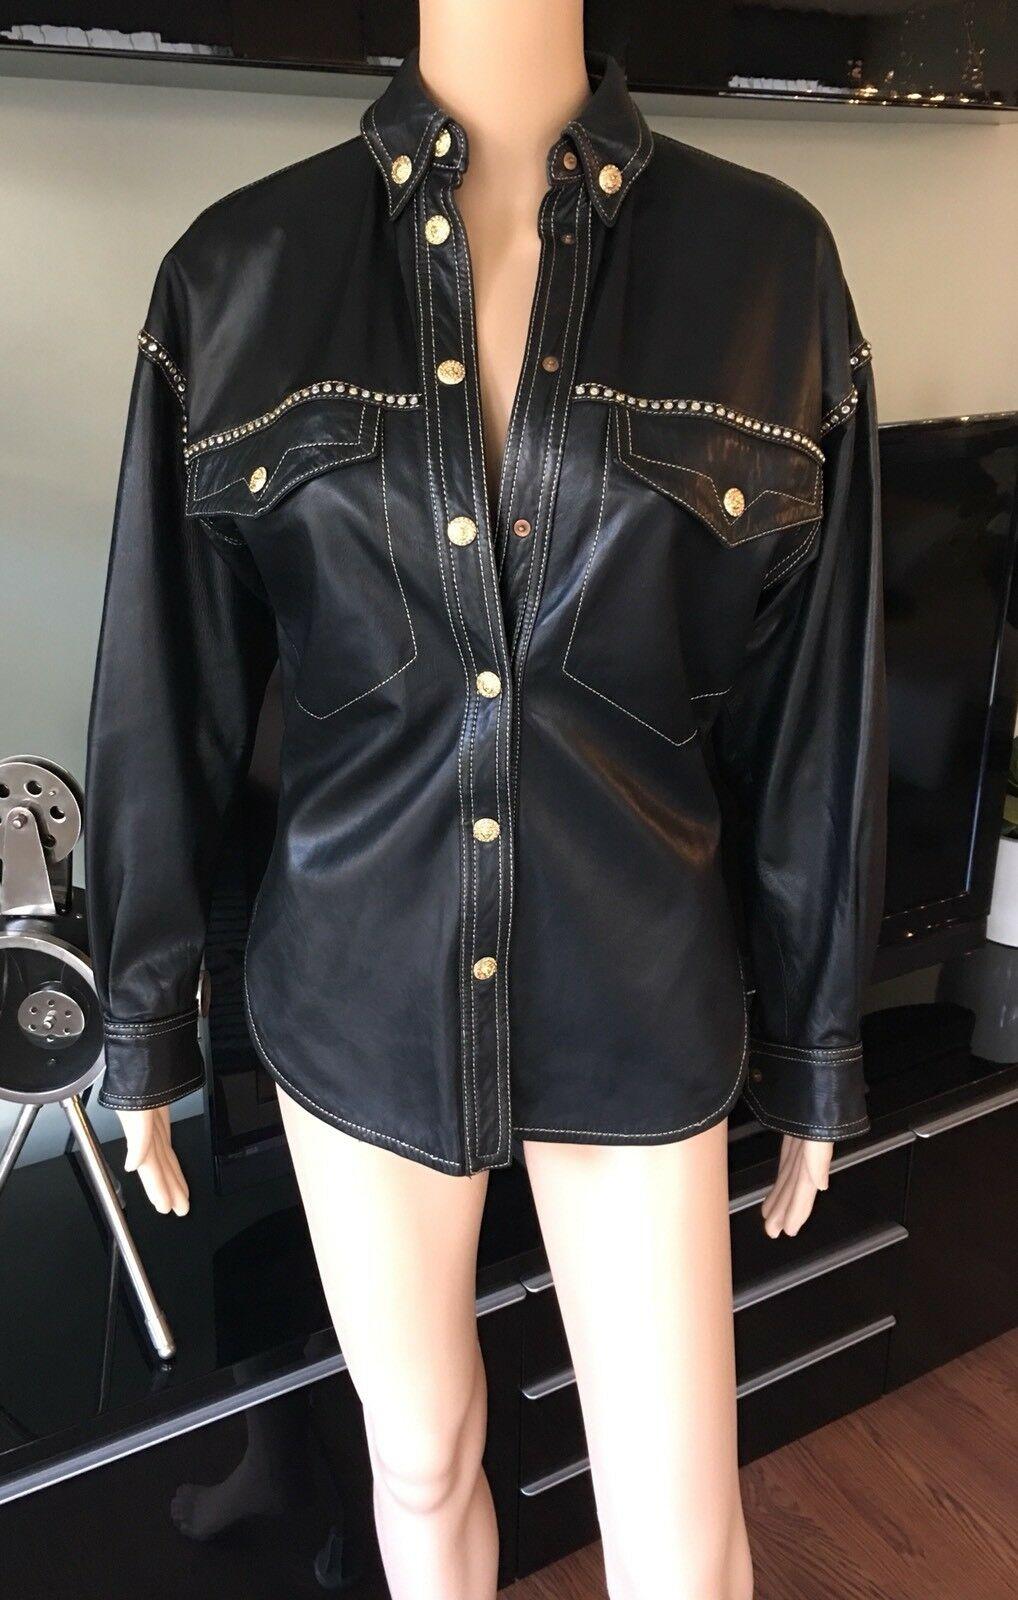 GIANNI VERSACE F/W 1992 Runway Vintage Embellished Leather Shirt Jacket Top IT 38

Gianni Versace leather shirt/jacket with pointed collar, dual pockets at bust, long sleeves and embellished gold-tone snap closures at front. 

About Versace: Founded